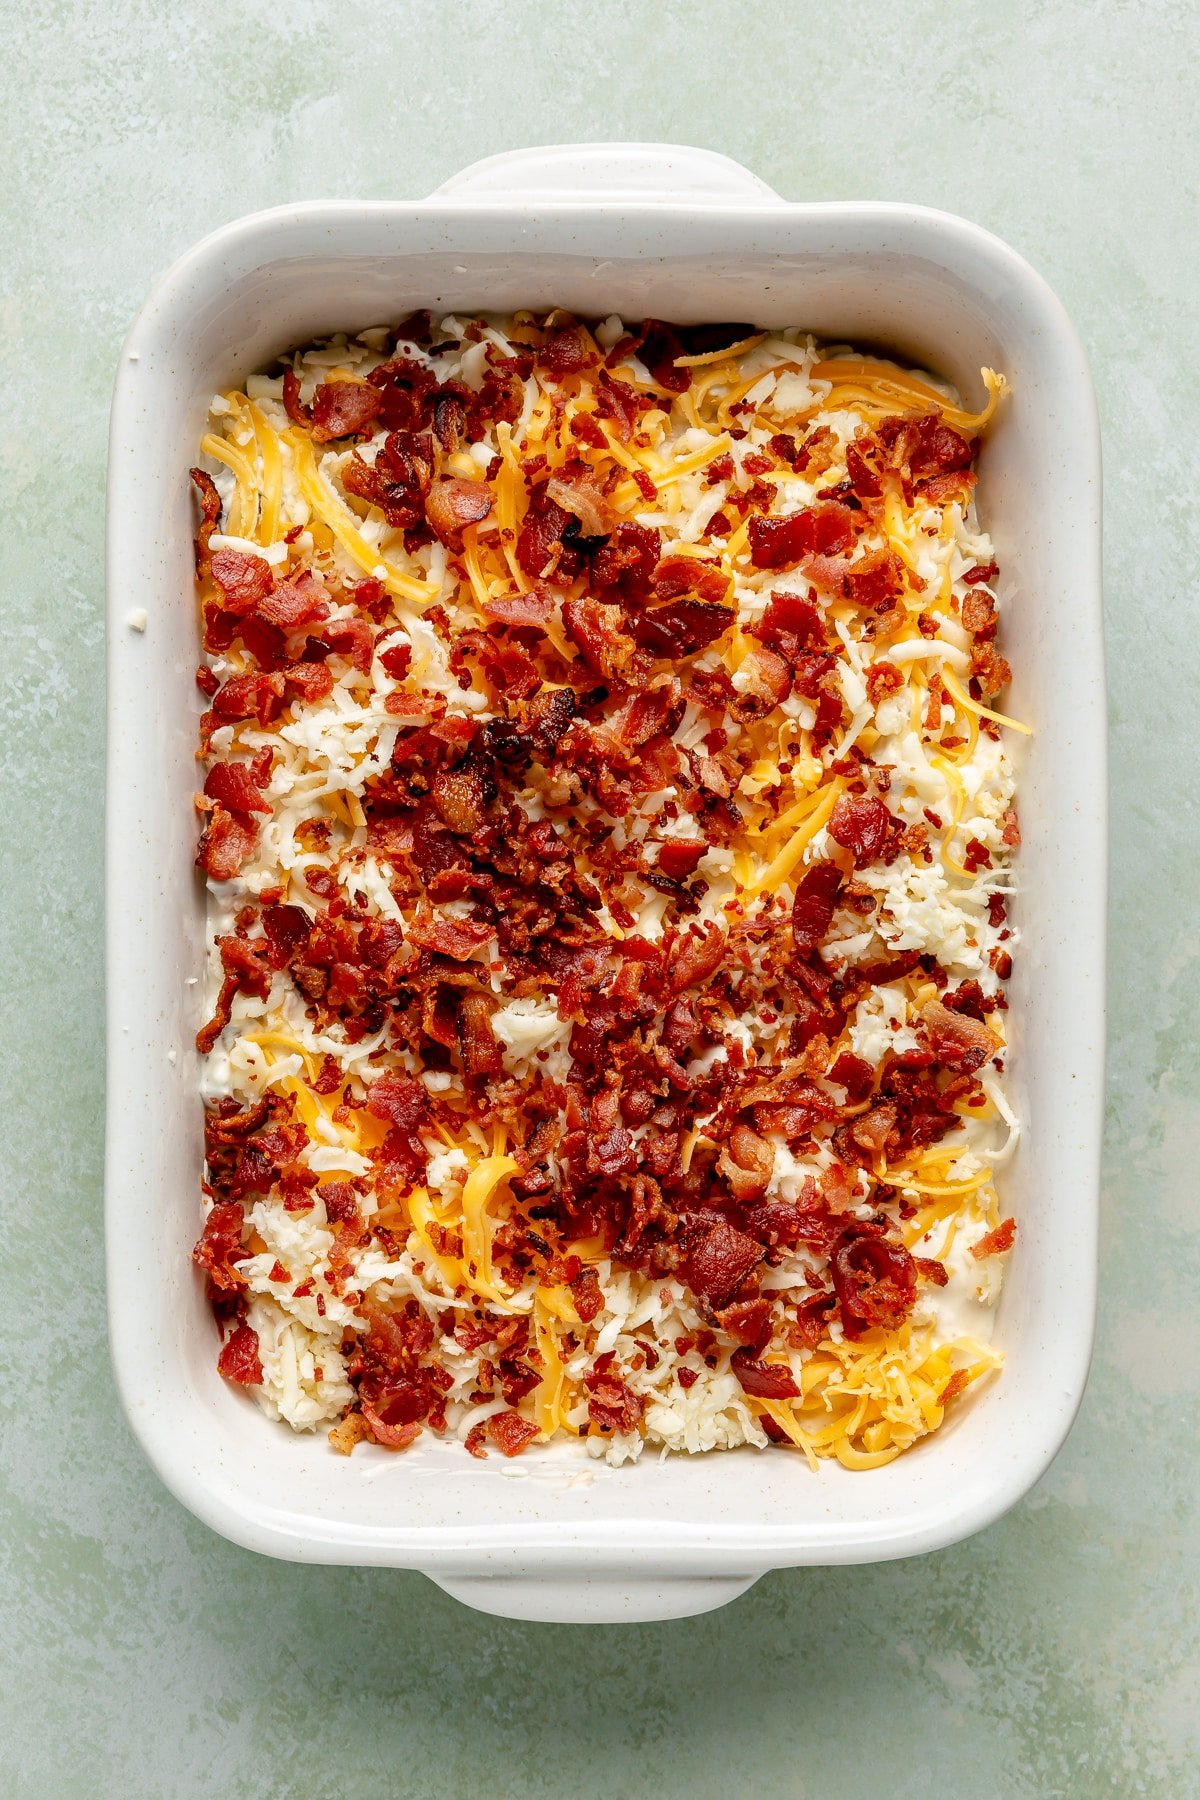 The cream cheese mixture has been placed into a white casserole dish. It has been topped with shredded cheese and bacon bits.